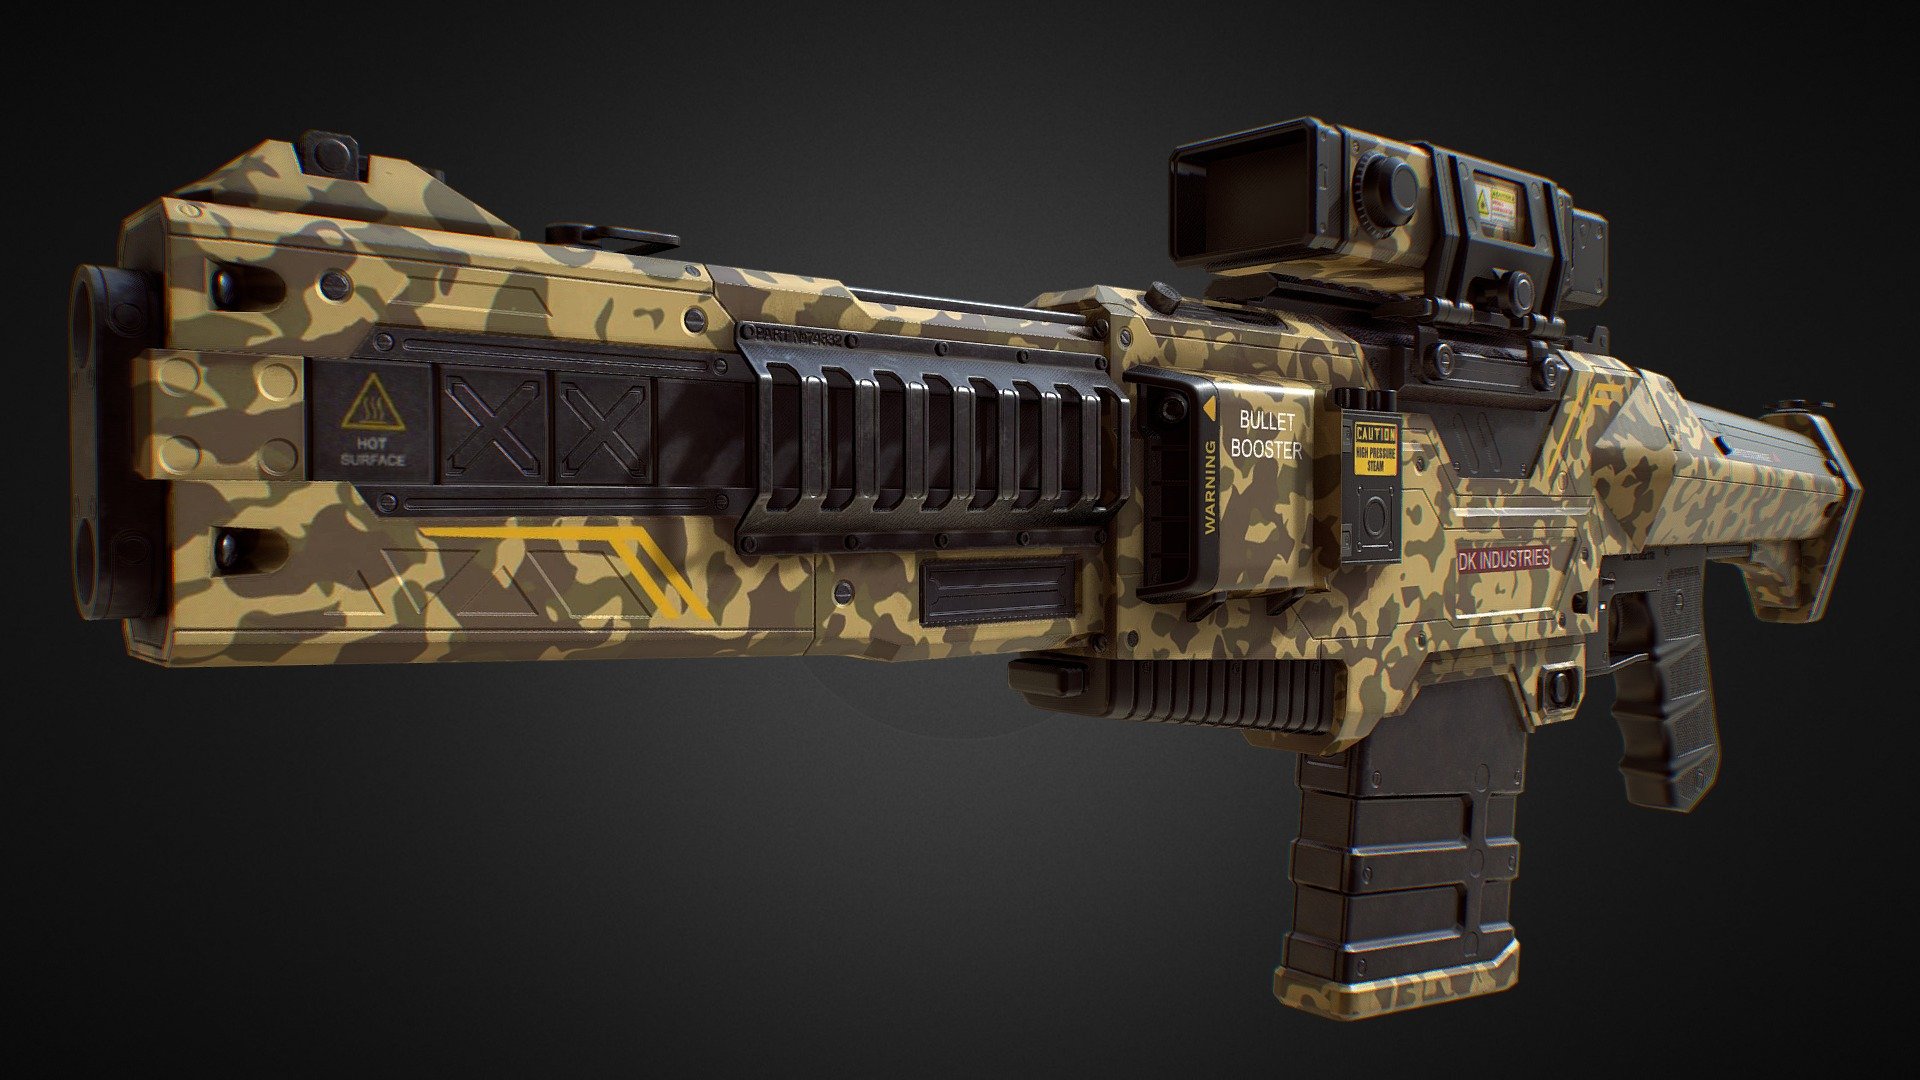 PBR Modular Assault Rifle from Sci-Fi weapon pack 
Unity Assetstore:   PBR SciFi Weapons v2
CG trader:   PBR SciFi Weapons v2
With movable parts and hires textures - PBR Assault Rifle (Cammo Skin 3) - 3D model by Dmitrii_Kutsenko (@Dmitrii_Kutcenko) 3d model